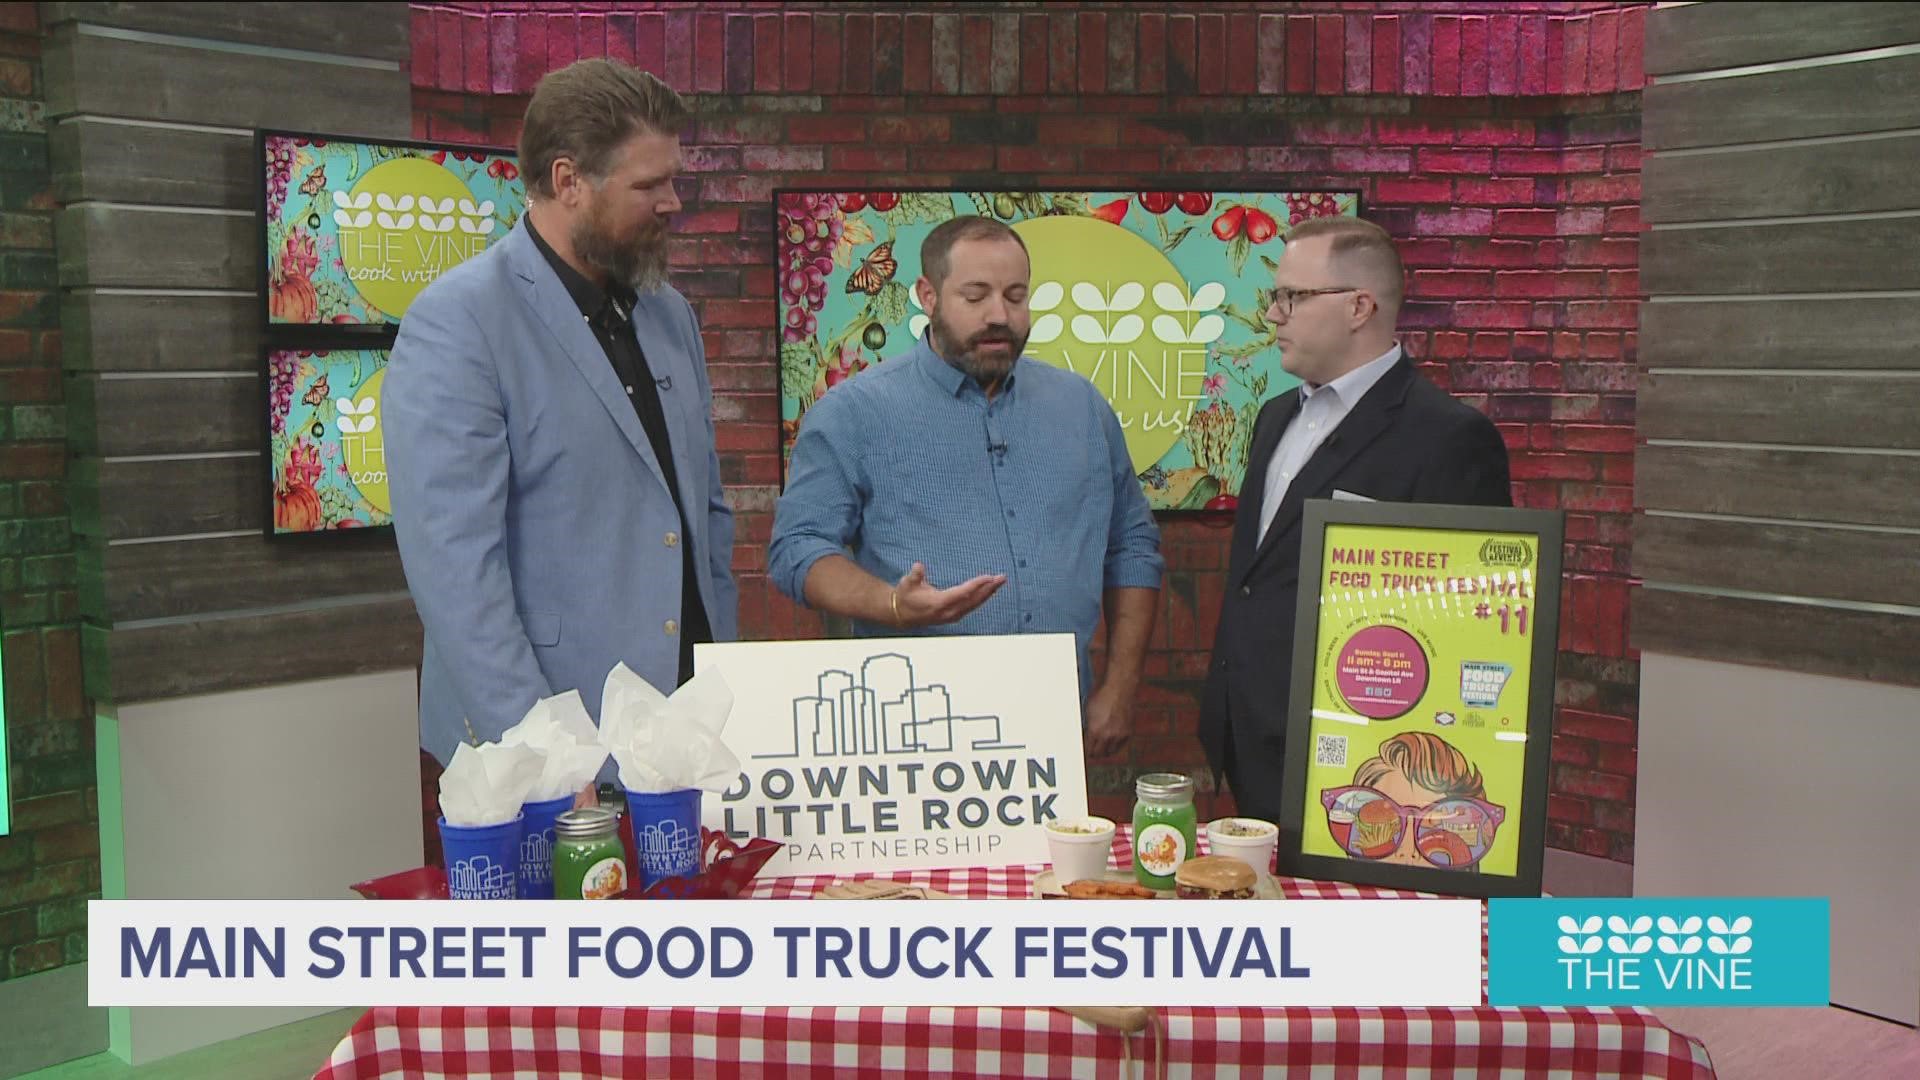 The Main Street Food Truck Festival was an idea created by the task force as a way to bring people back to Main Street and support Downtown Little Rock.